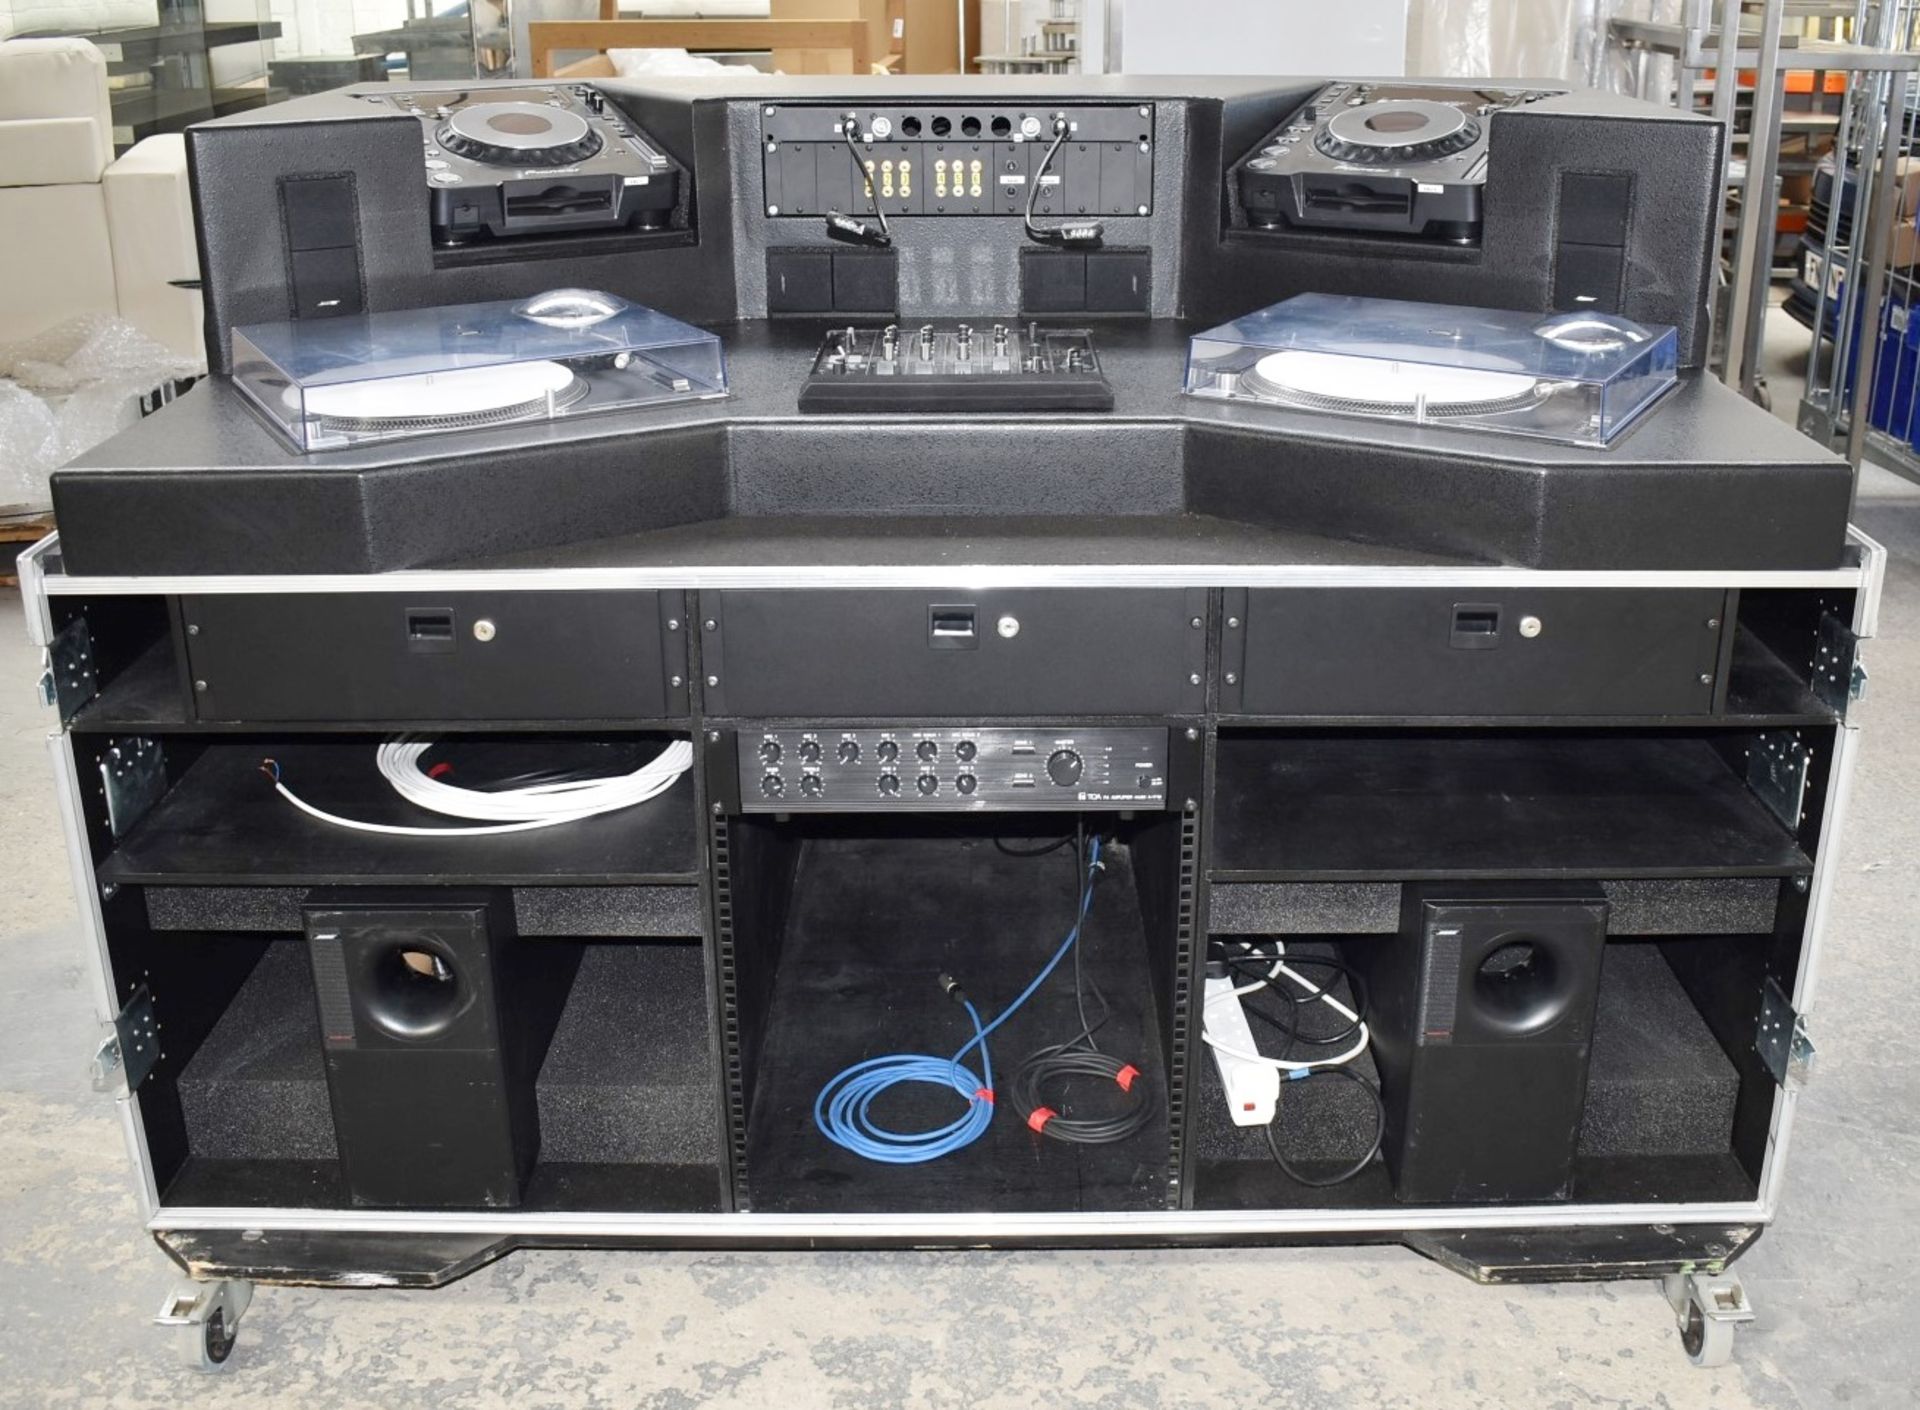 1 x Mobile DJ Booth in Shock Solutions Flight Case - Features Equipment By Pioneer, Technics & Bose! - Image 47 of 95